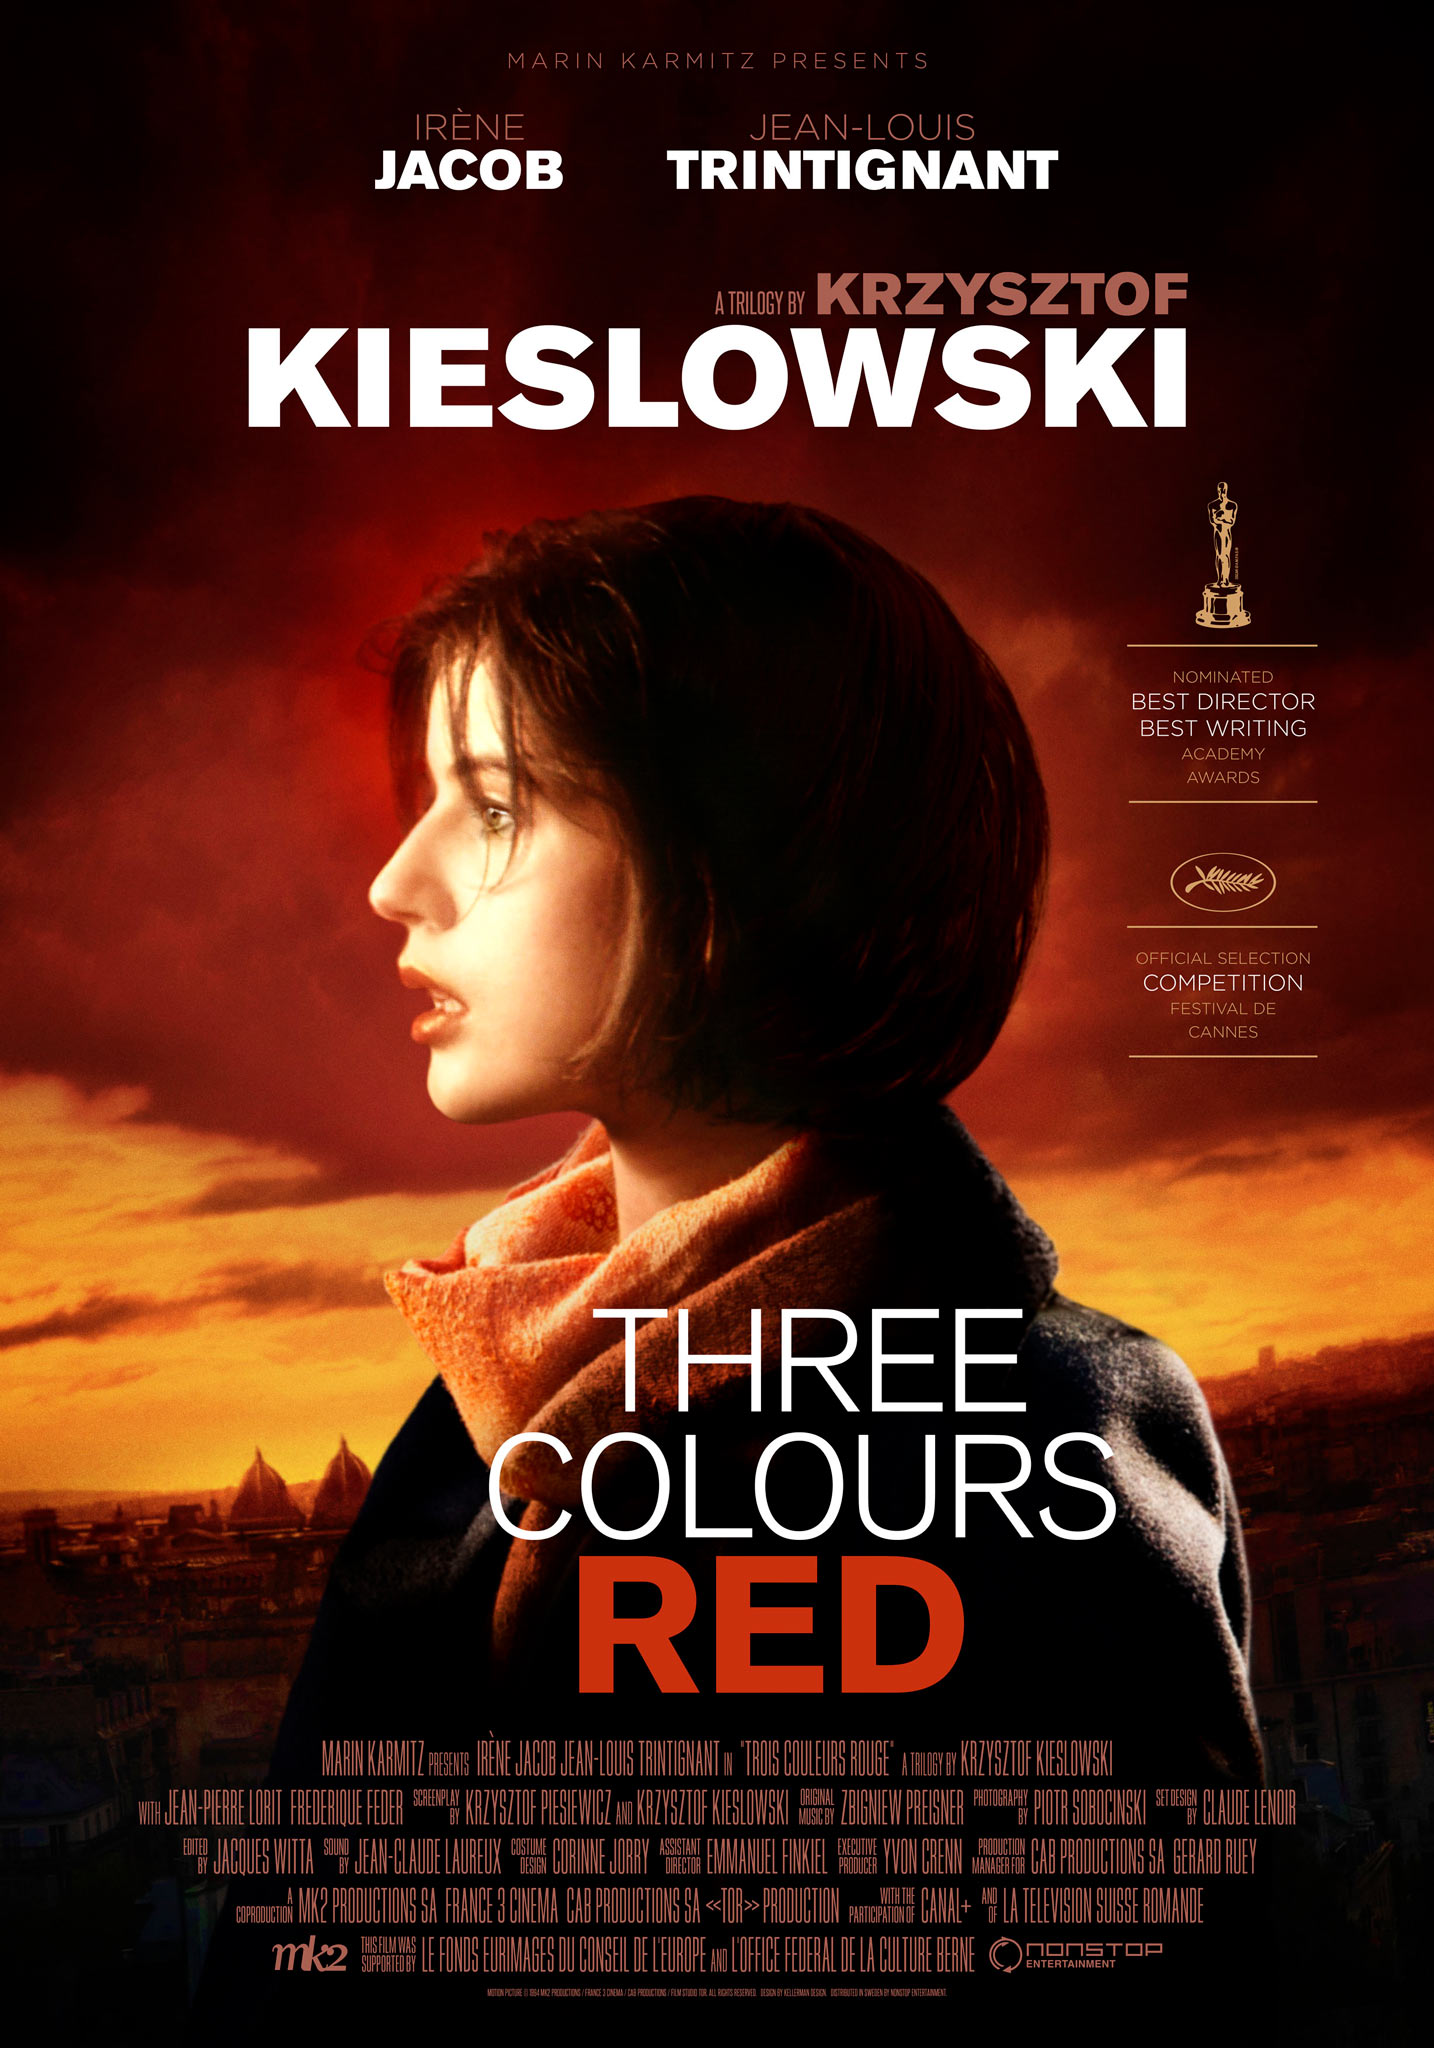 Three Colours Red (1994) theatrical onesheet